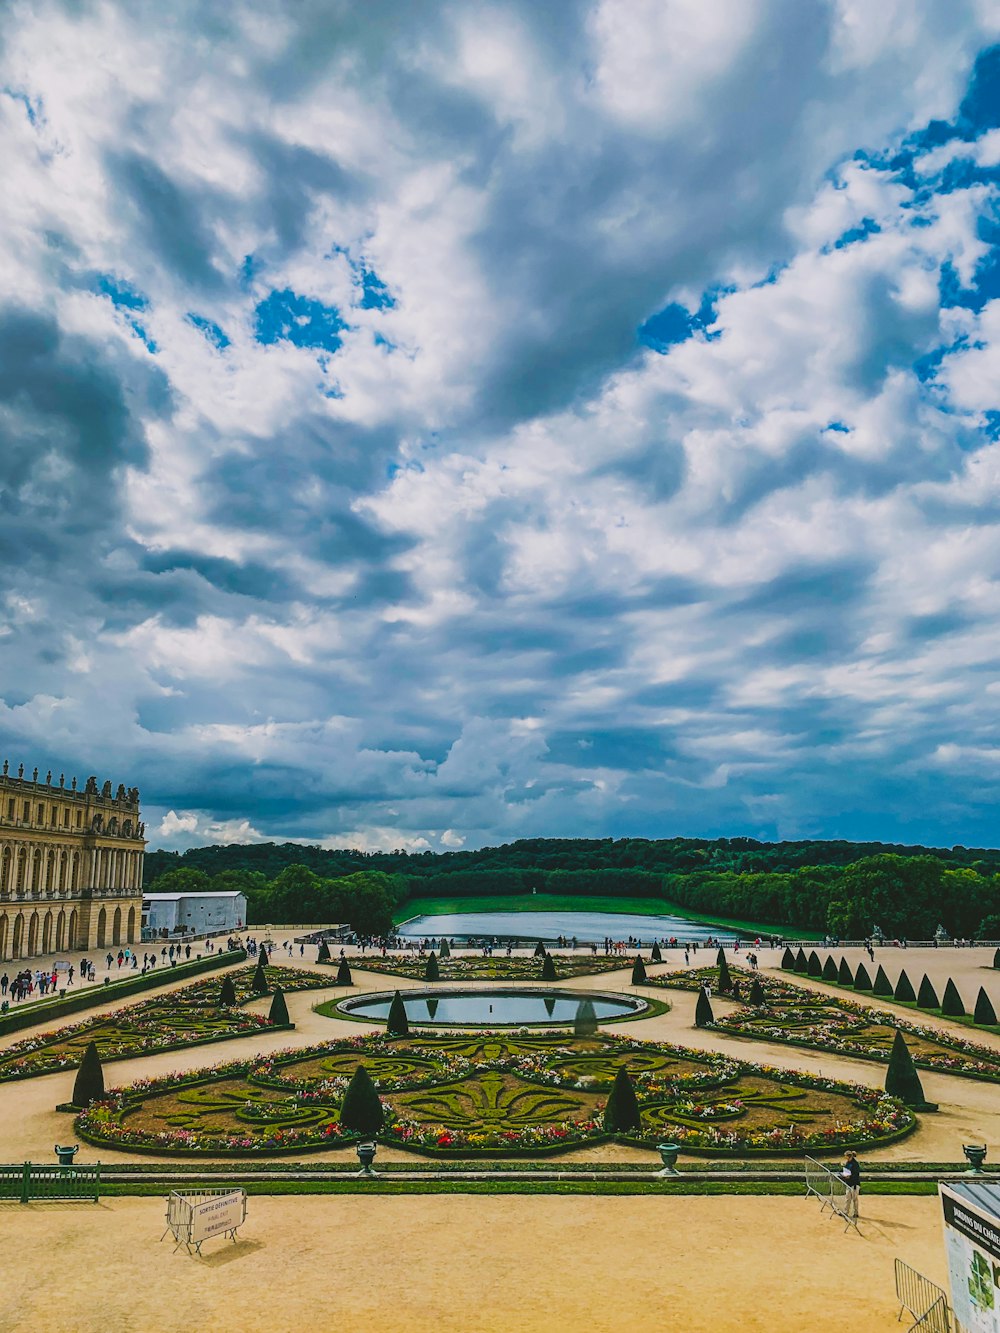 people standing near Palace of Versailles in France under white and blue sky